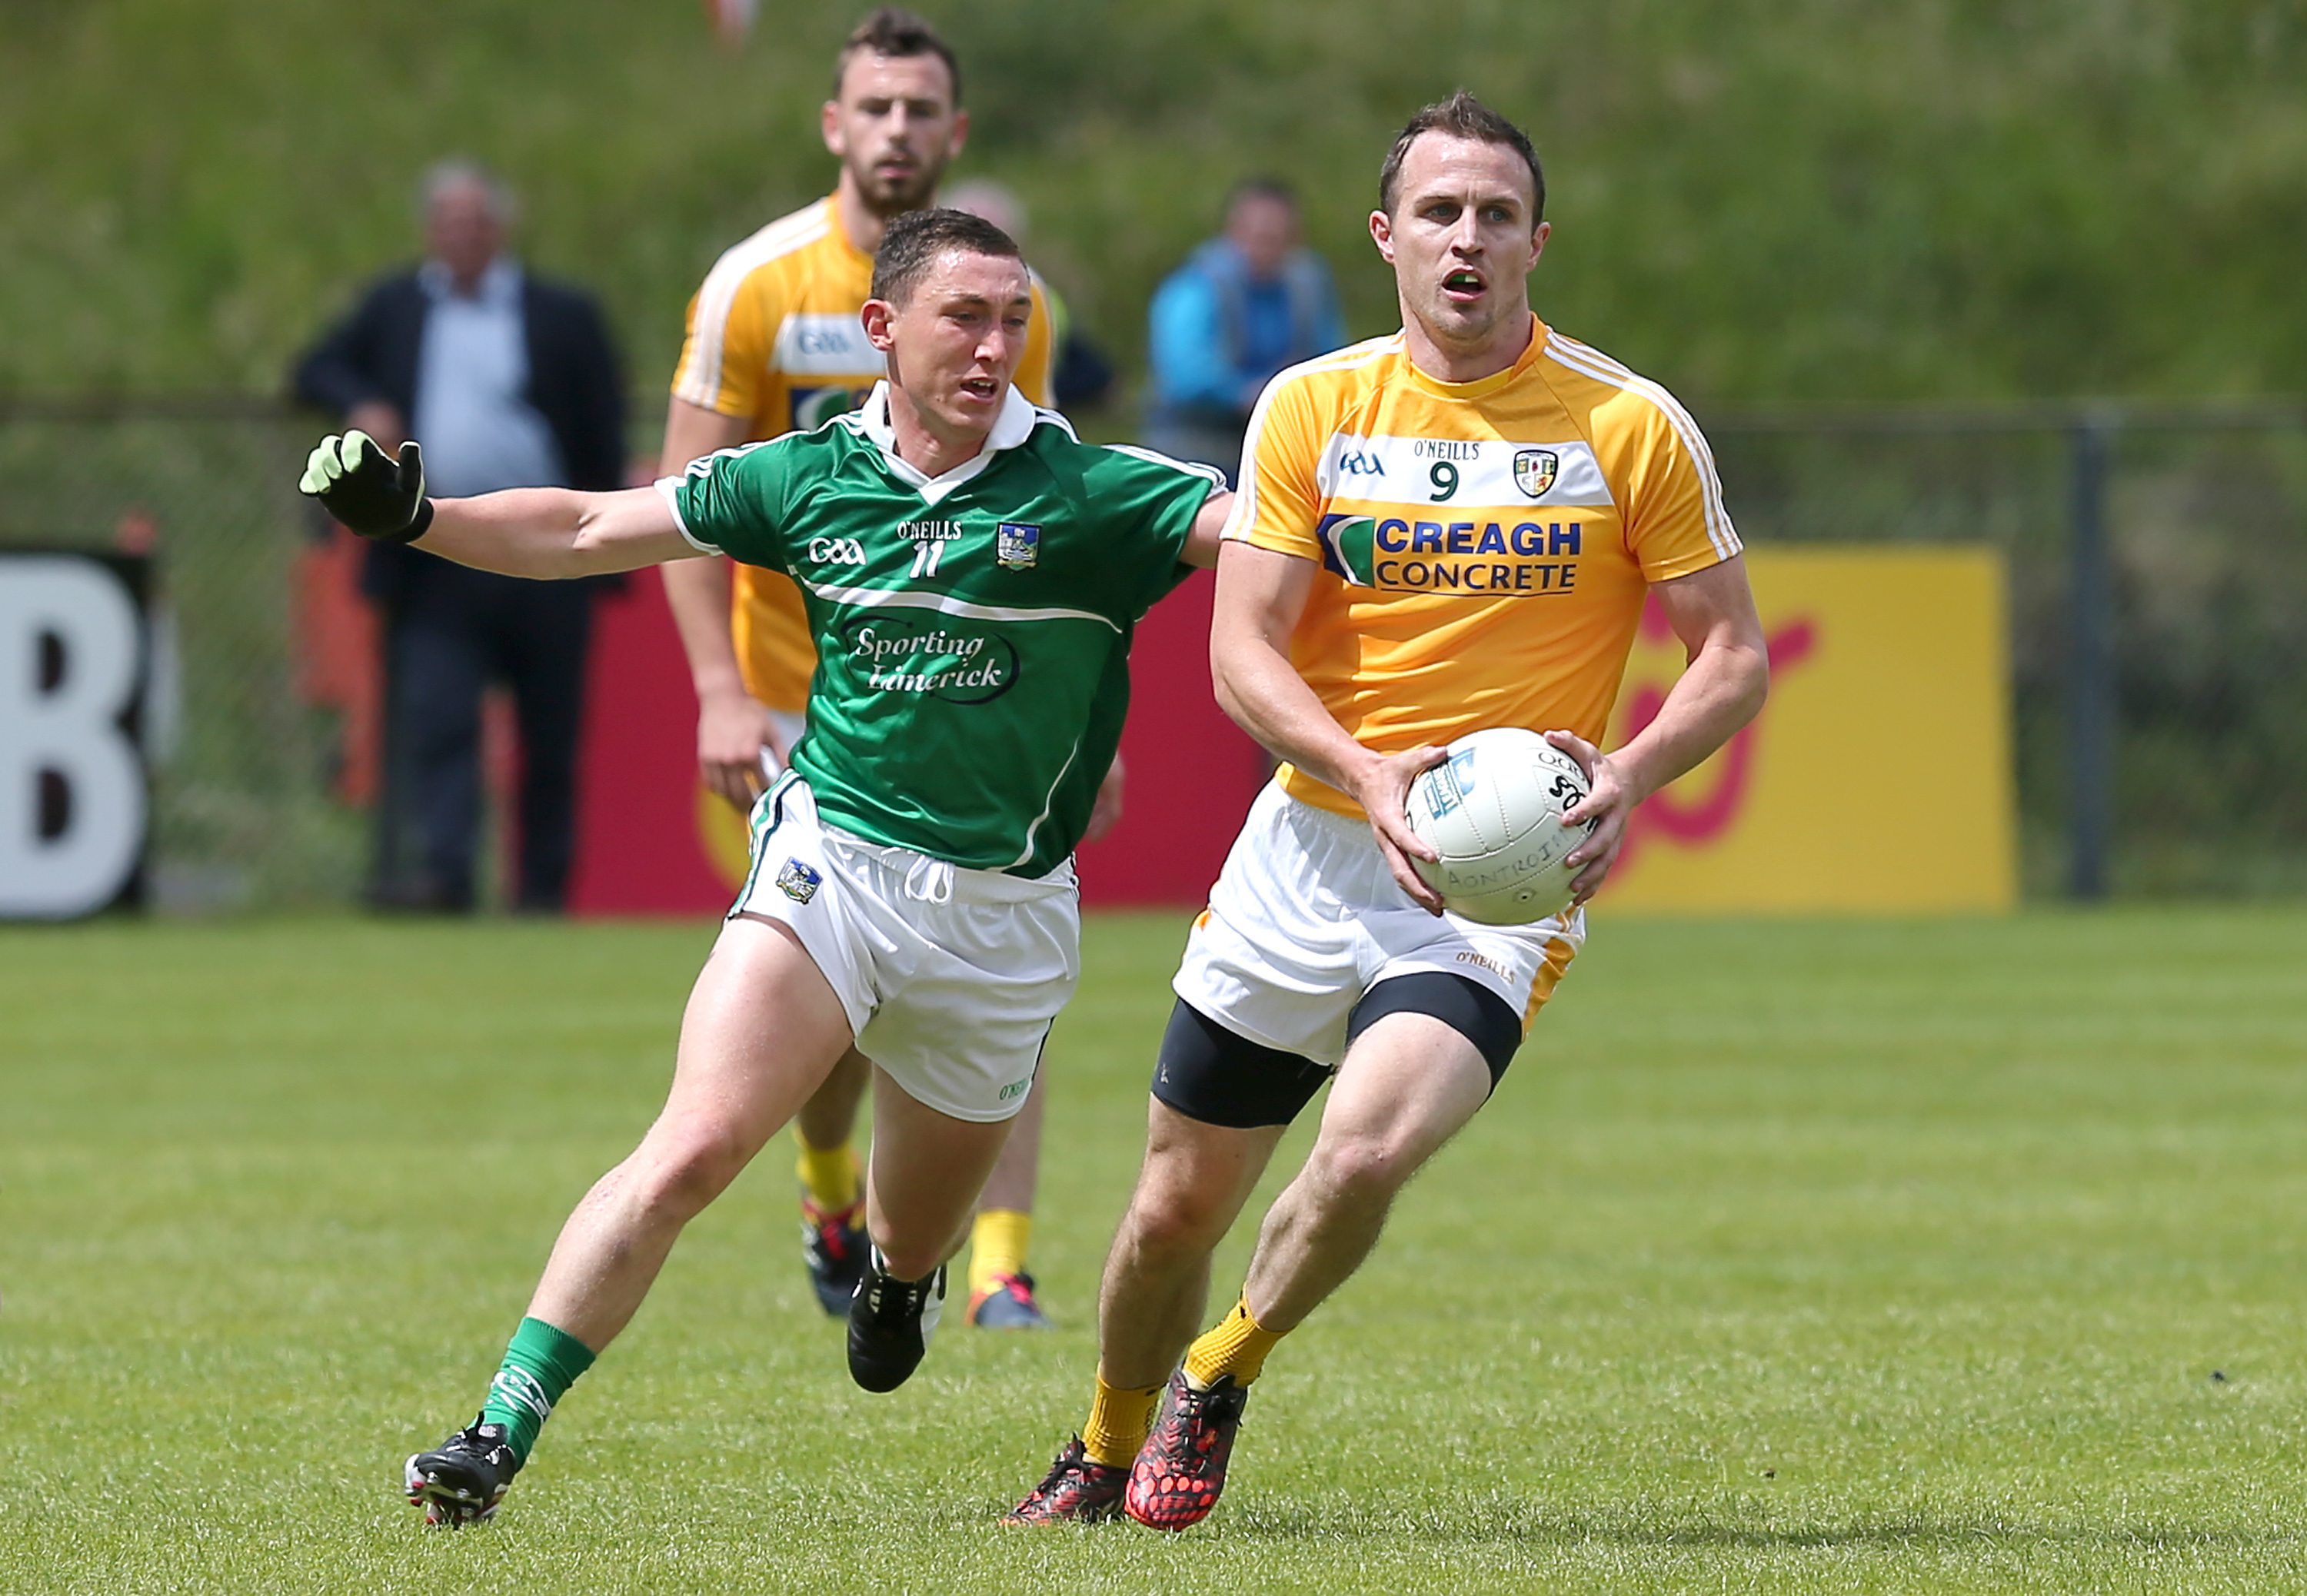 Michael McCann, pictured in action against Limerick’s Peter Nash during Antrim’s Qualifier defeat at Corrigan Park in June, insists he hasn’t retired from inter-county football despite opting off the Saffron squad for the forthcoming season due to work commitments 